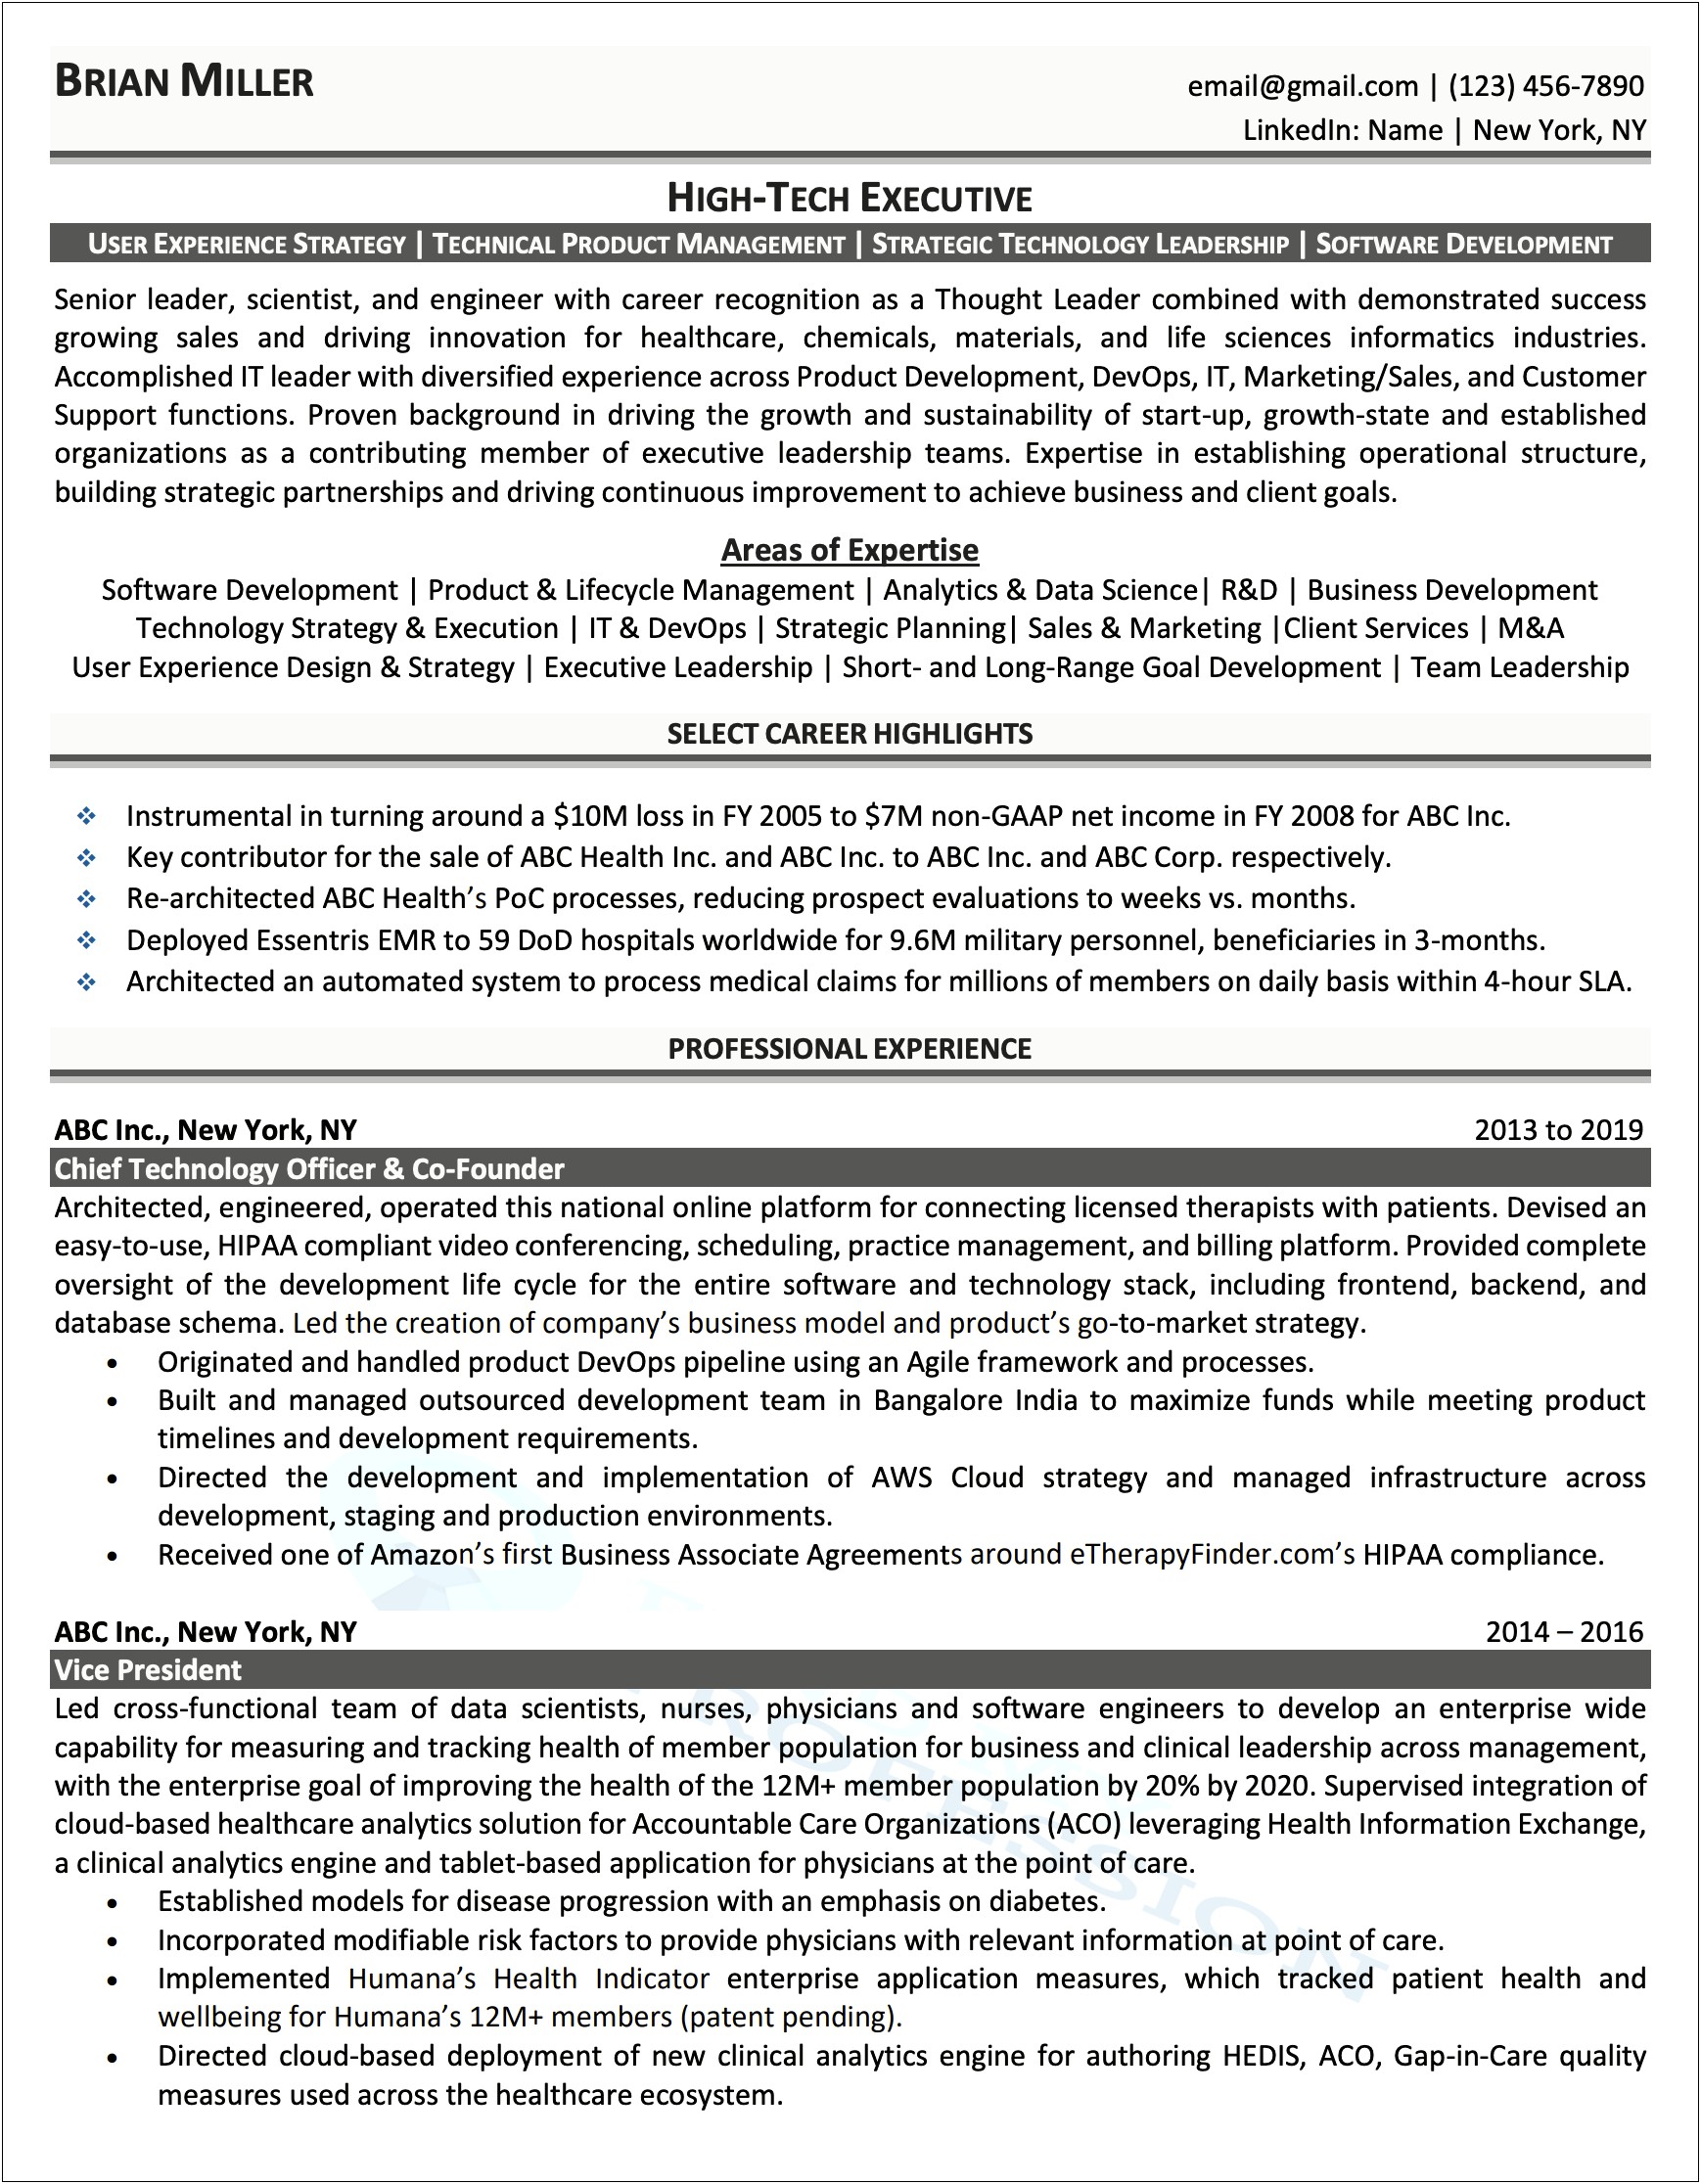 General Professional Summary Examples For Resume